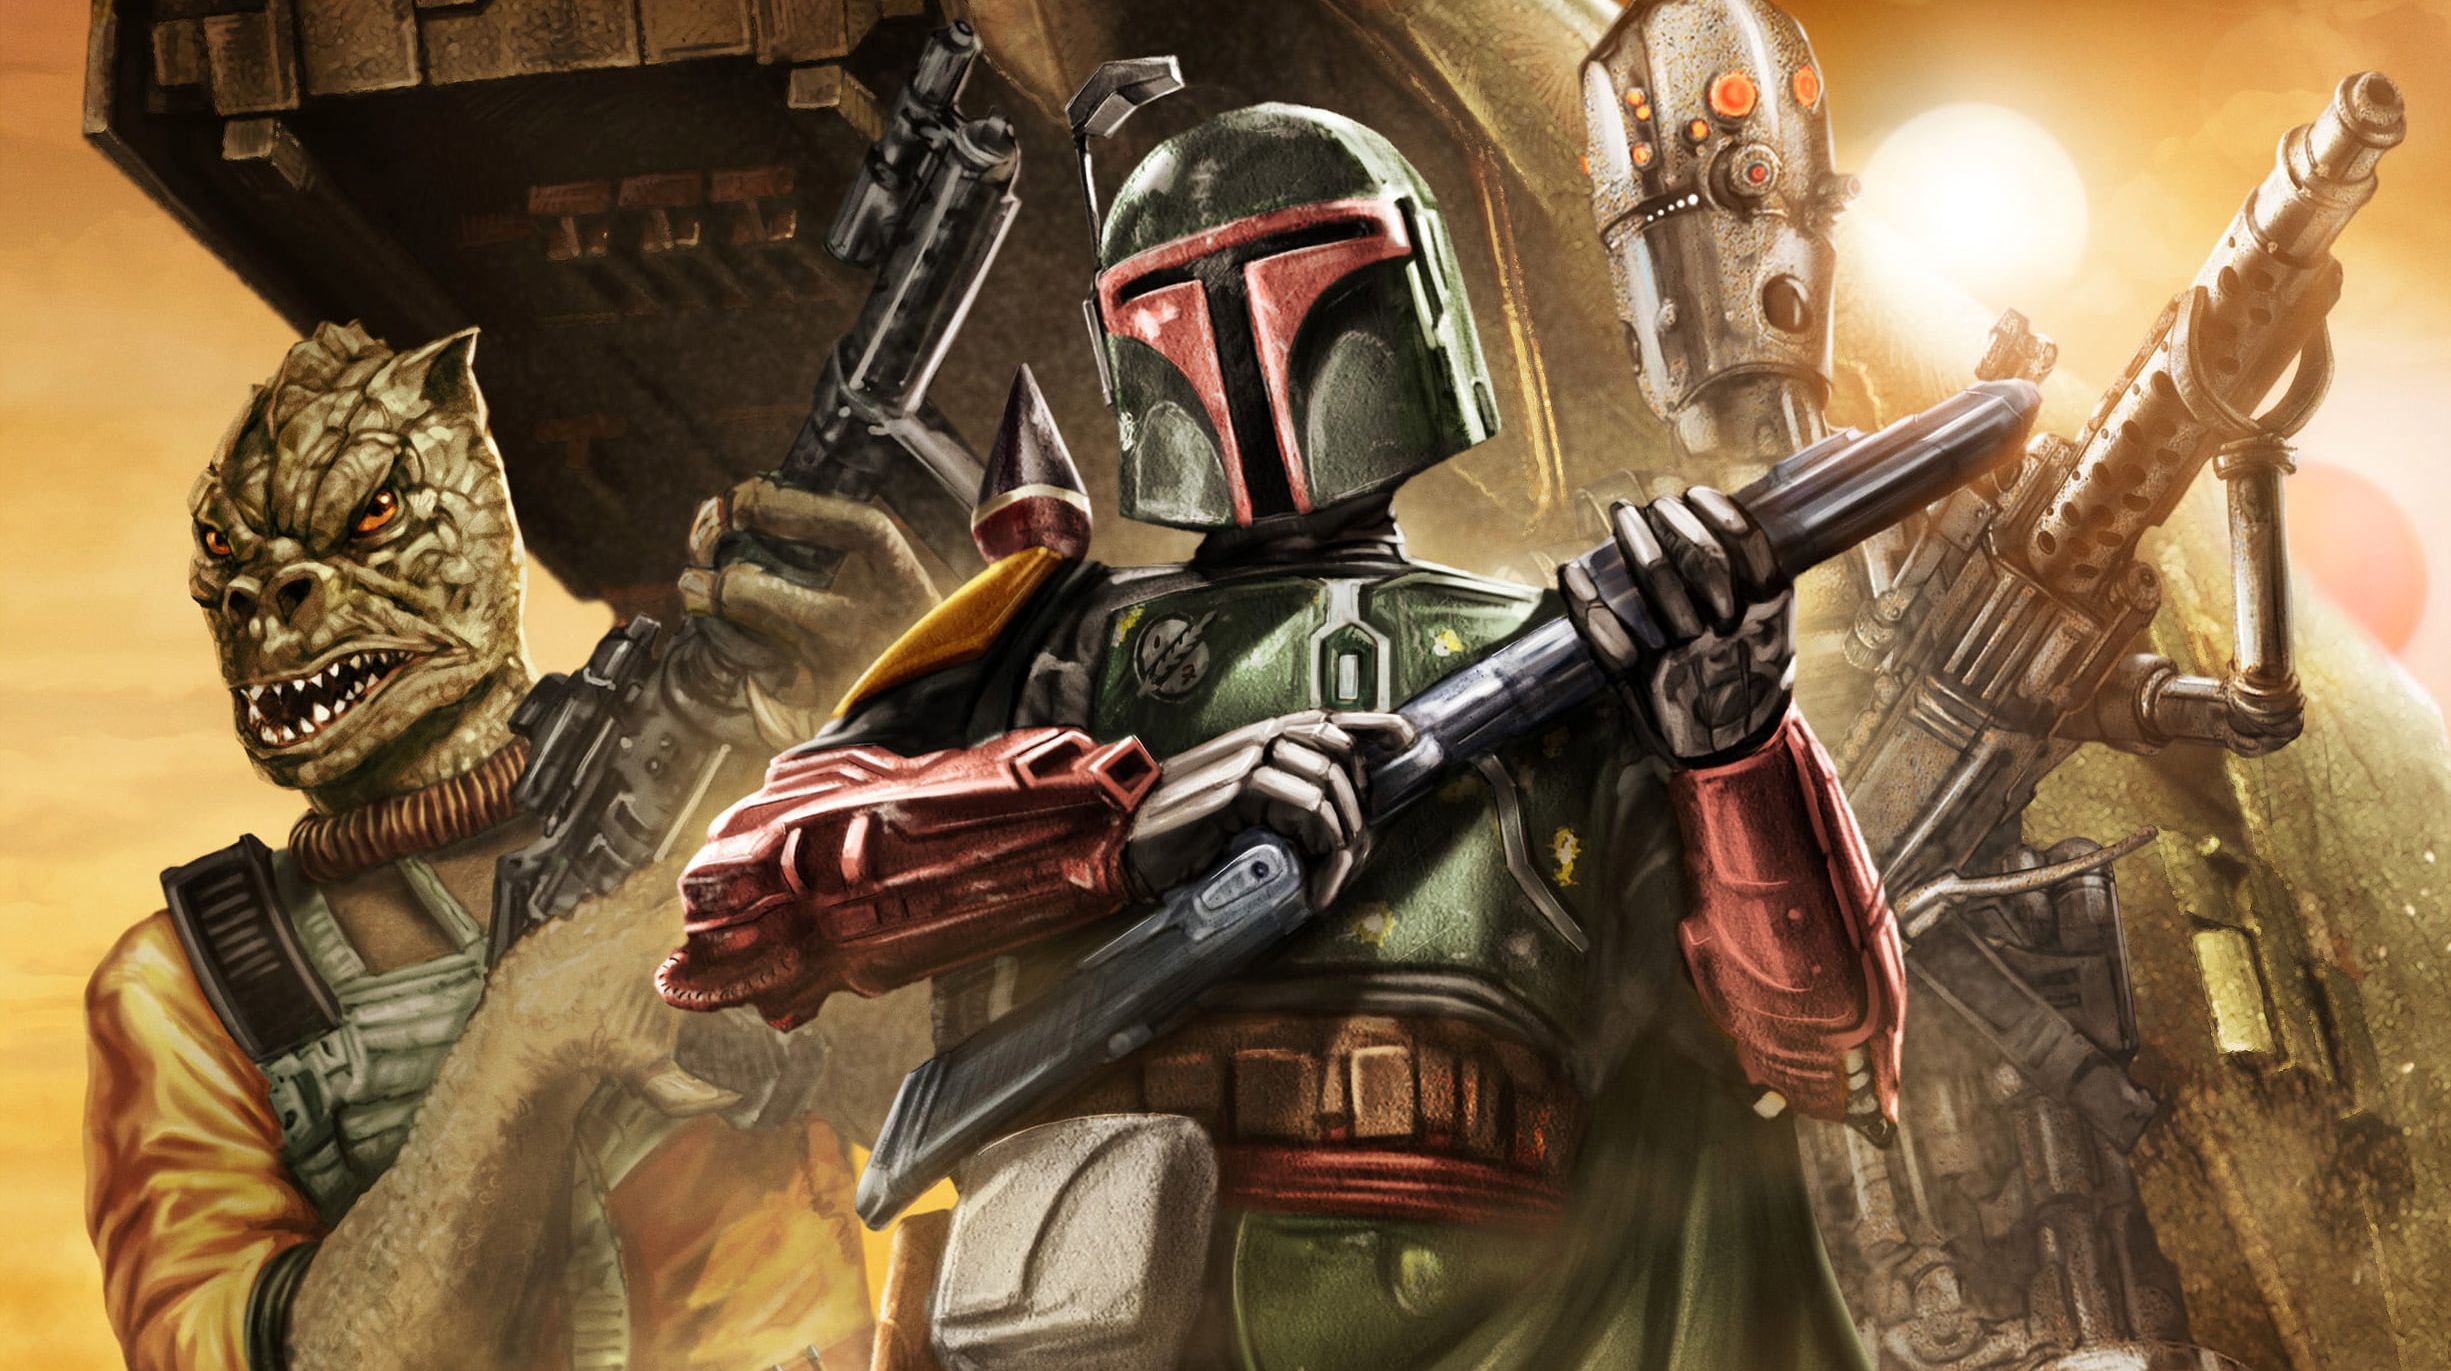 The Book Of Boba Fett Hd Wallpapers Wallpaper Cave